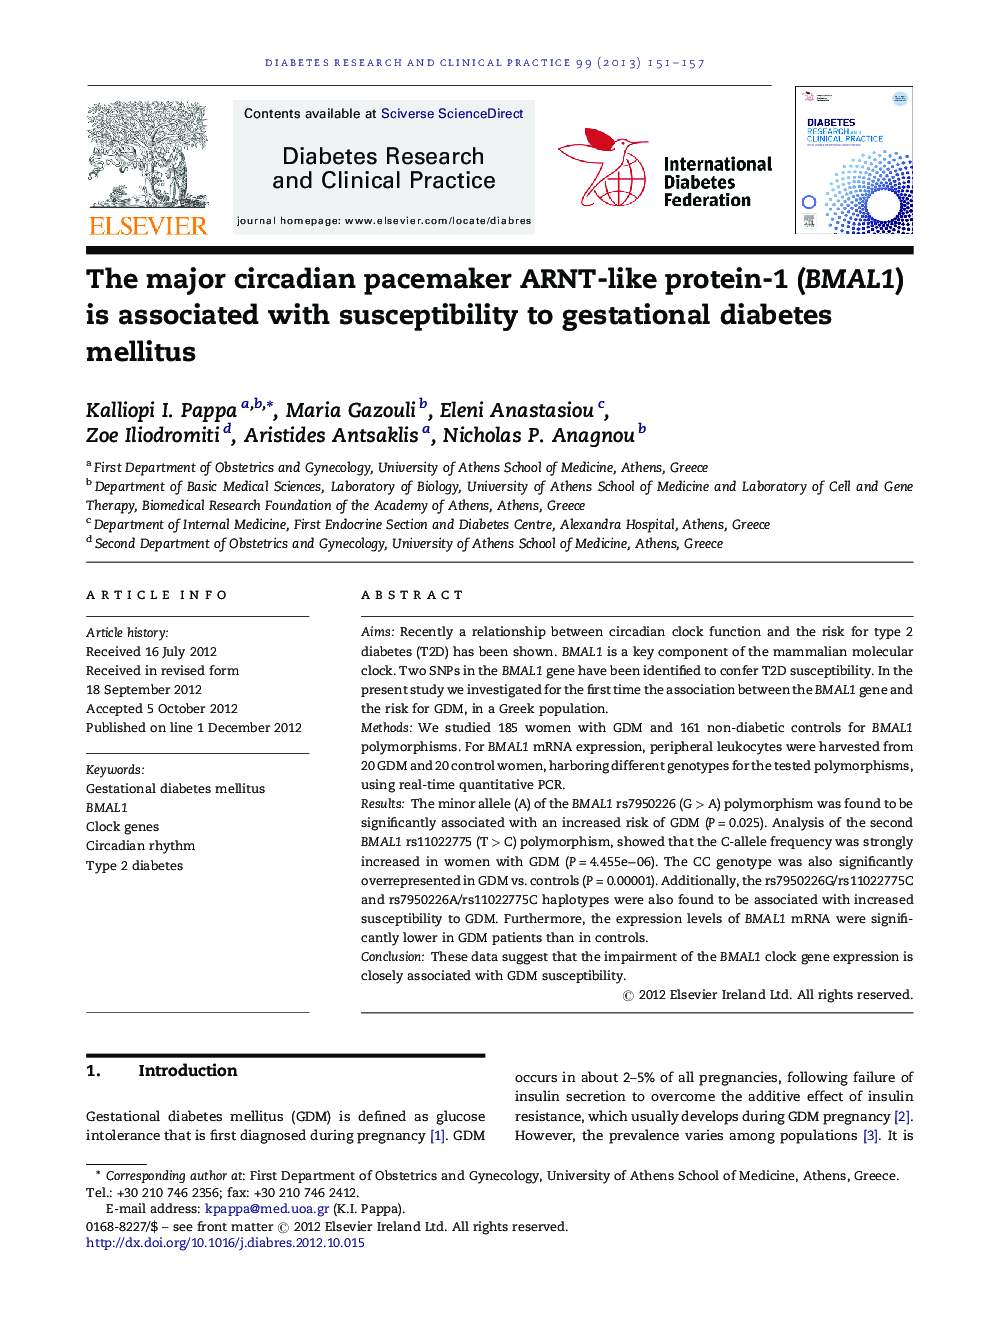 The major circadian pacemaker ARNT-like protein-1 (BMAL1) is associated with susceptibility to gestational diabetes mellitus